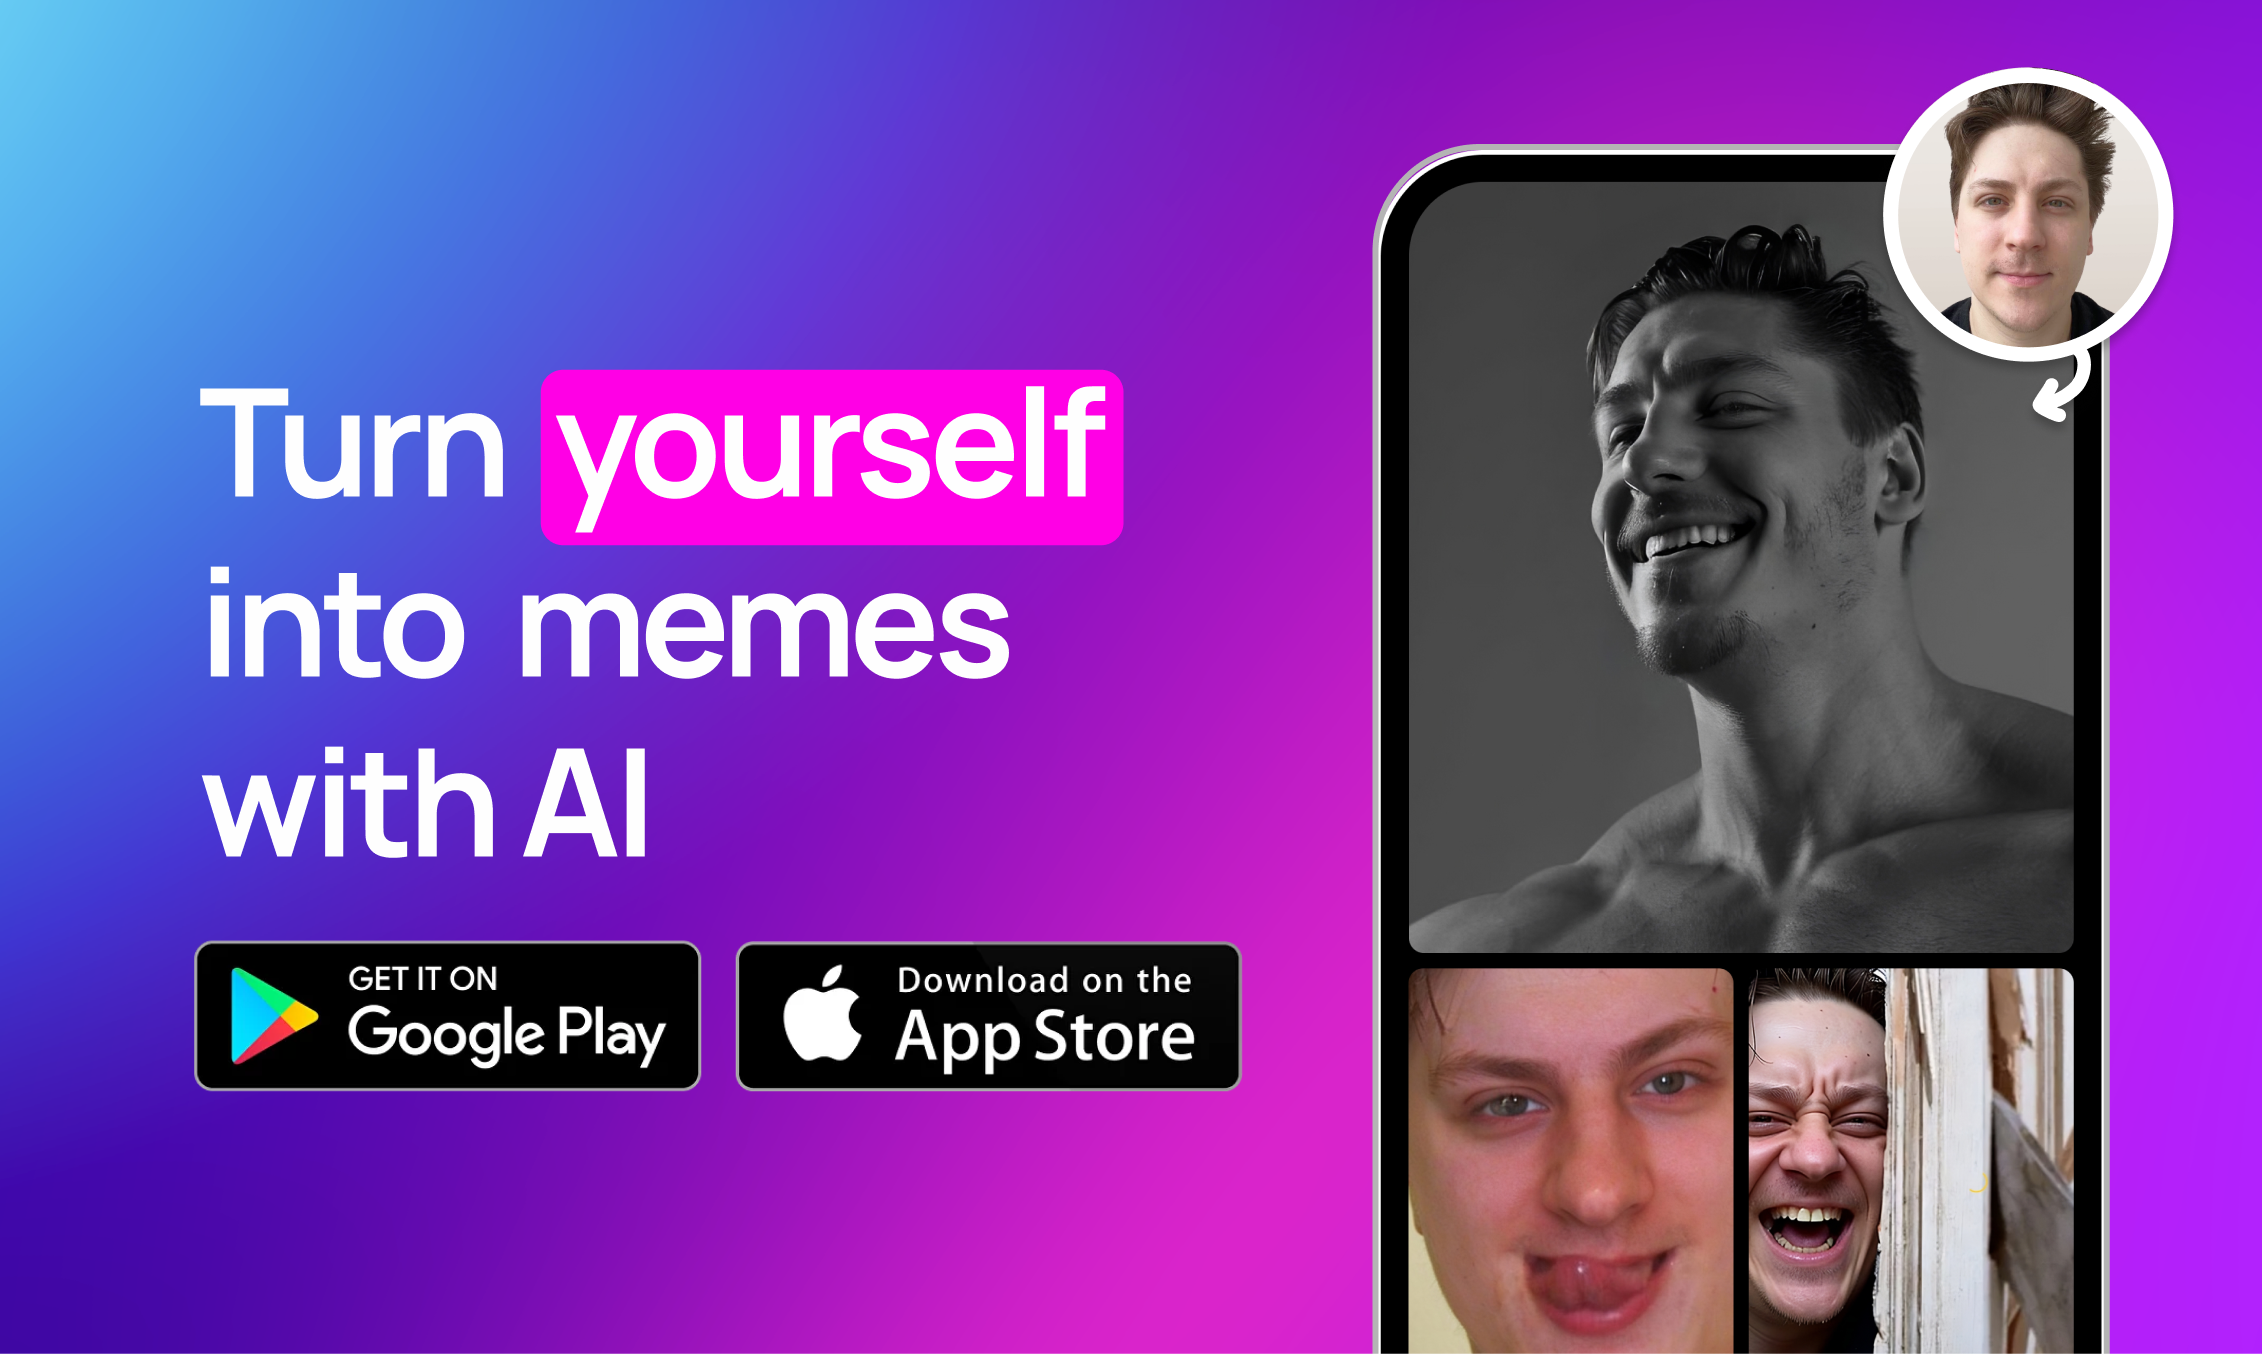 startuptile MeMemes-Turn yourself into memes: from GigaChad to DiCaprio